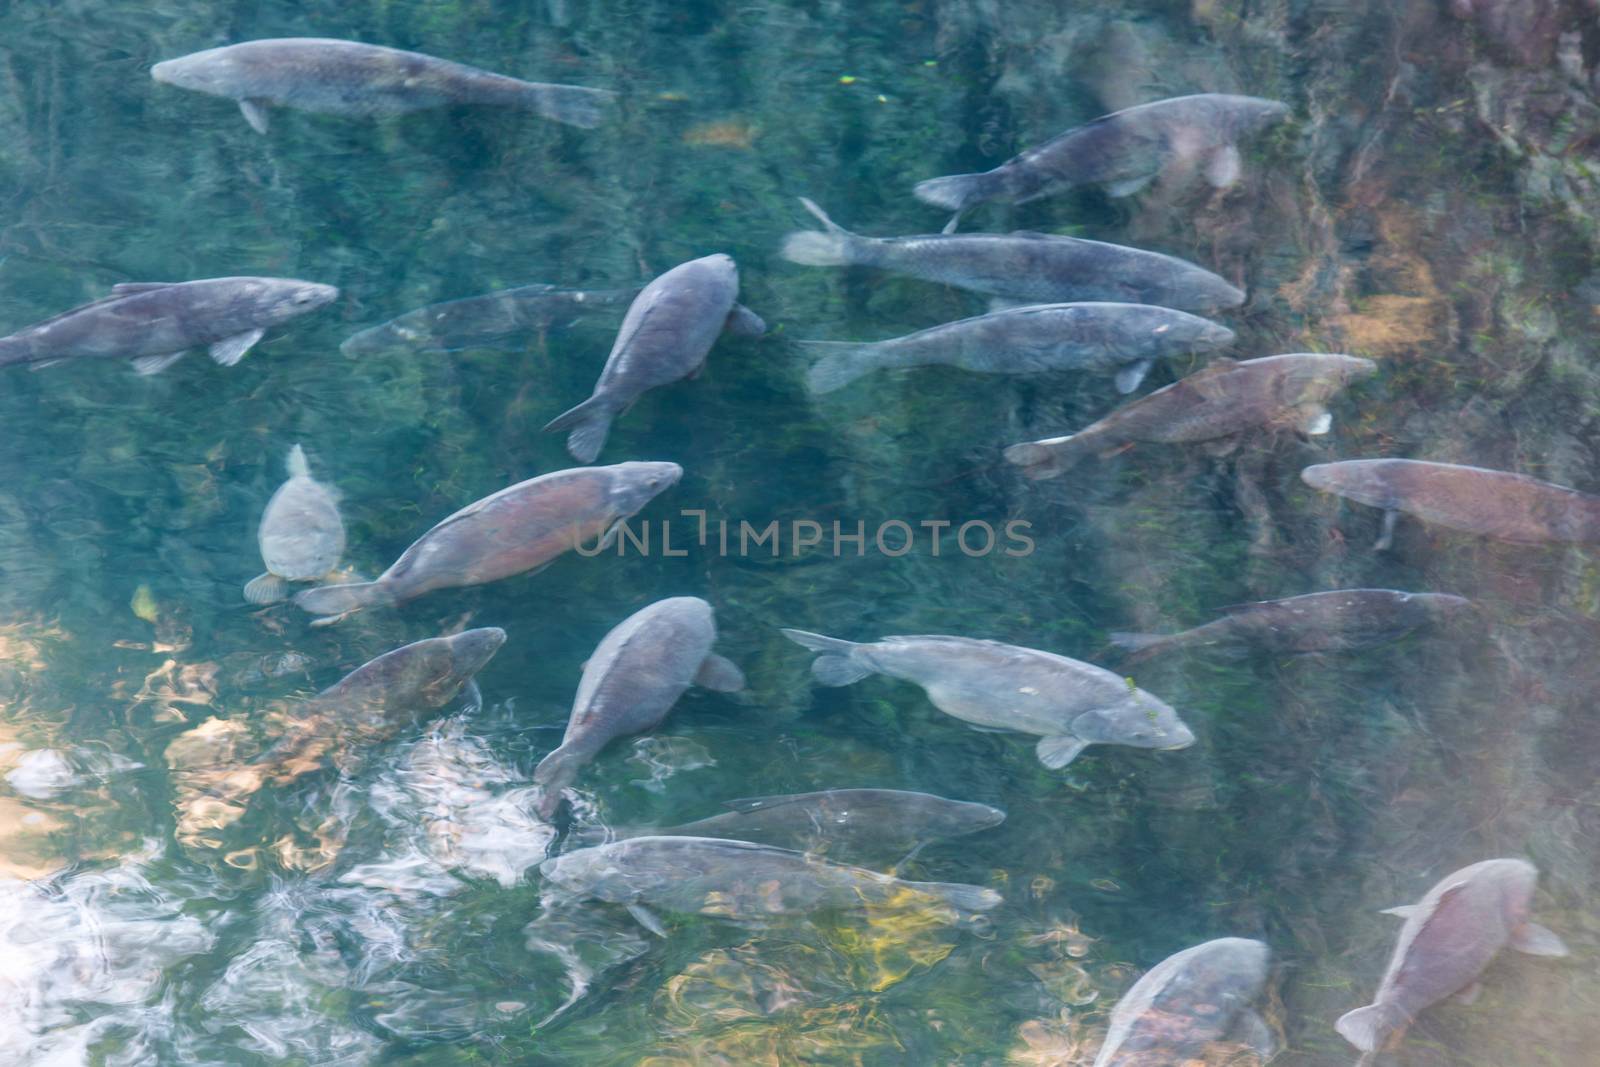 Fish pond with many wild carp on the water surface.